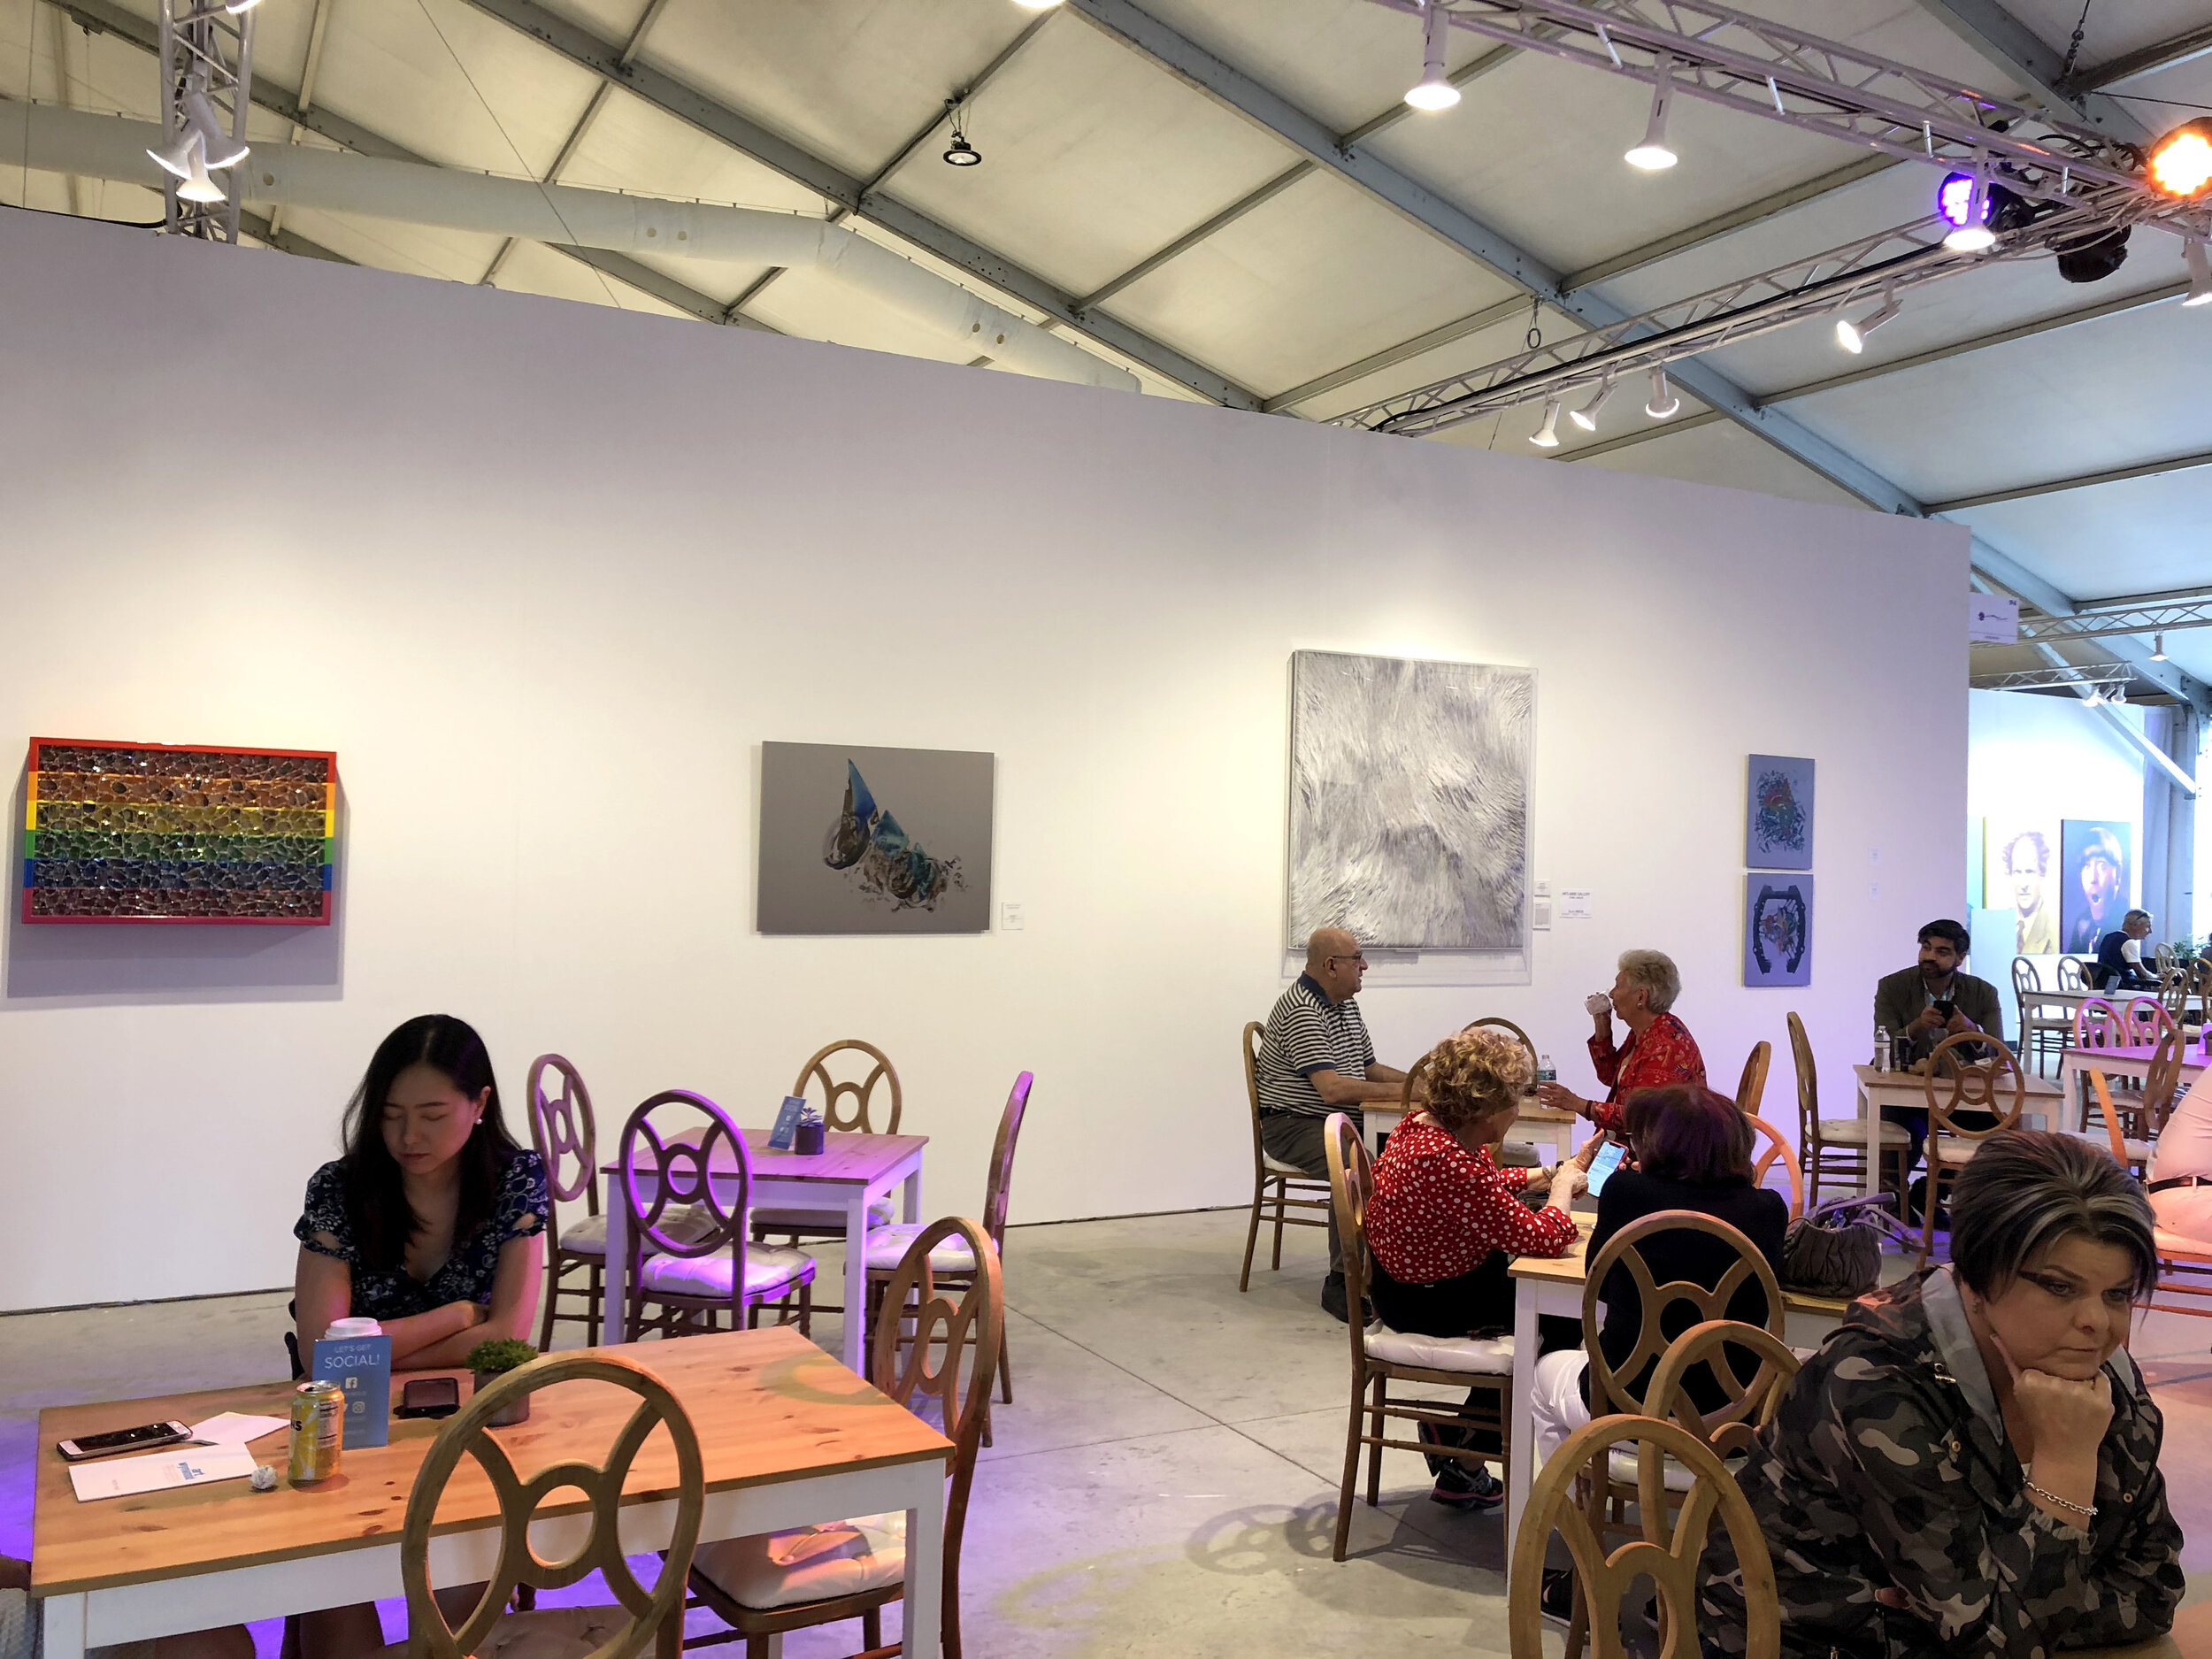  Santiago Medina's "Time and Space", laser image on Italian stainless steel, centrally featured in the public café space at Art Wynwood 2020. Medina's work is the second from the left. 